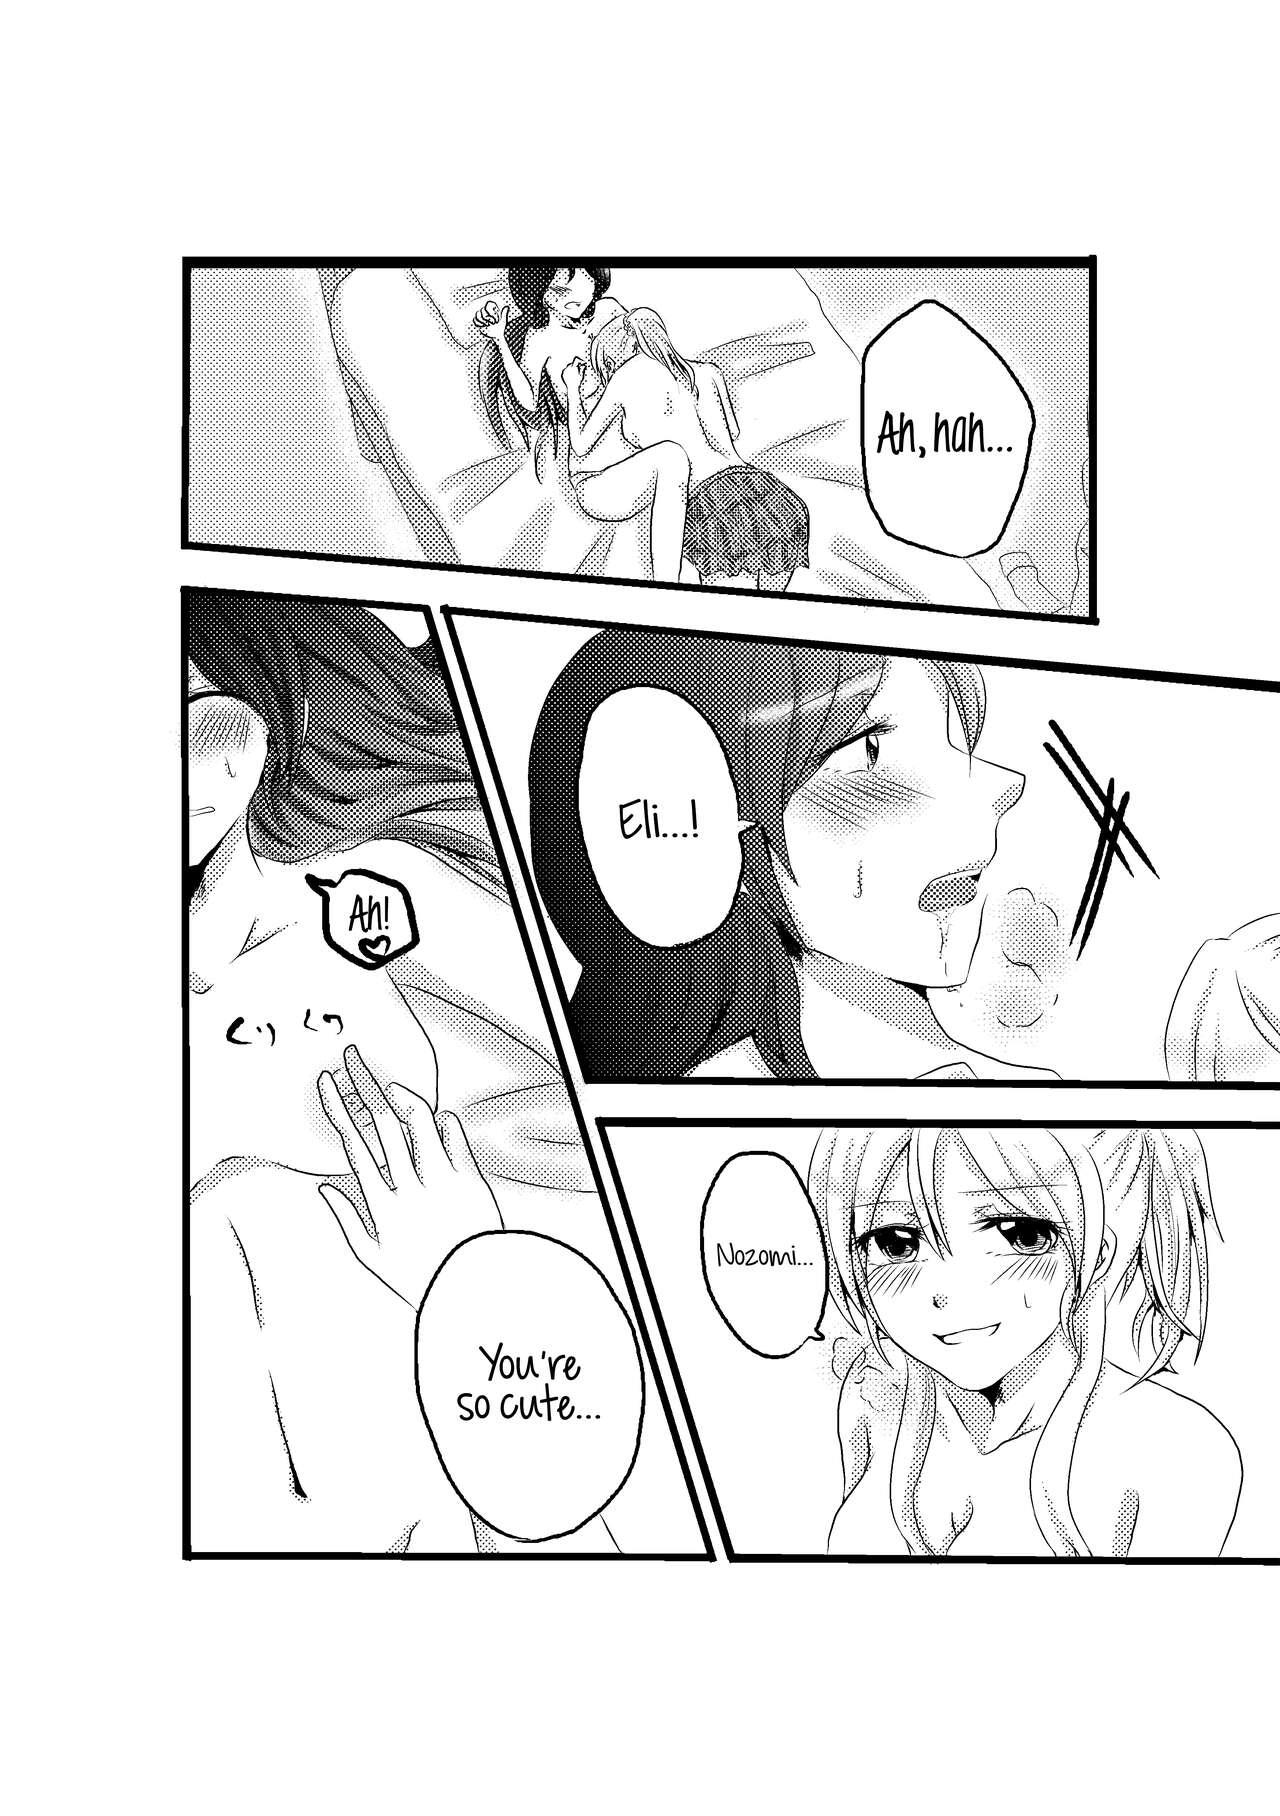 Transsexual [Inugoya (Toshiko)] A story about mischievous Eli-chan and Nozomi-chan (Umi no Shinwa) (Love Live!) [English] [Usr32] [Digital] - Love live Money - Page 7